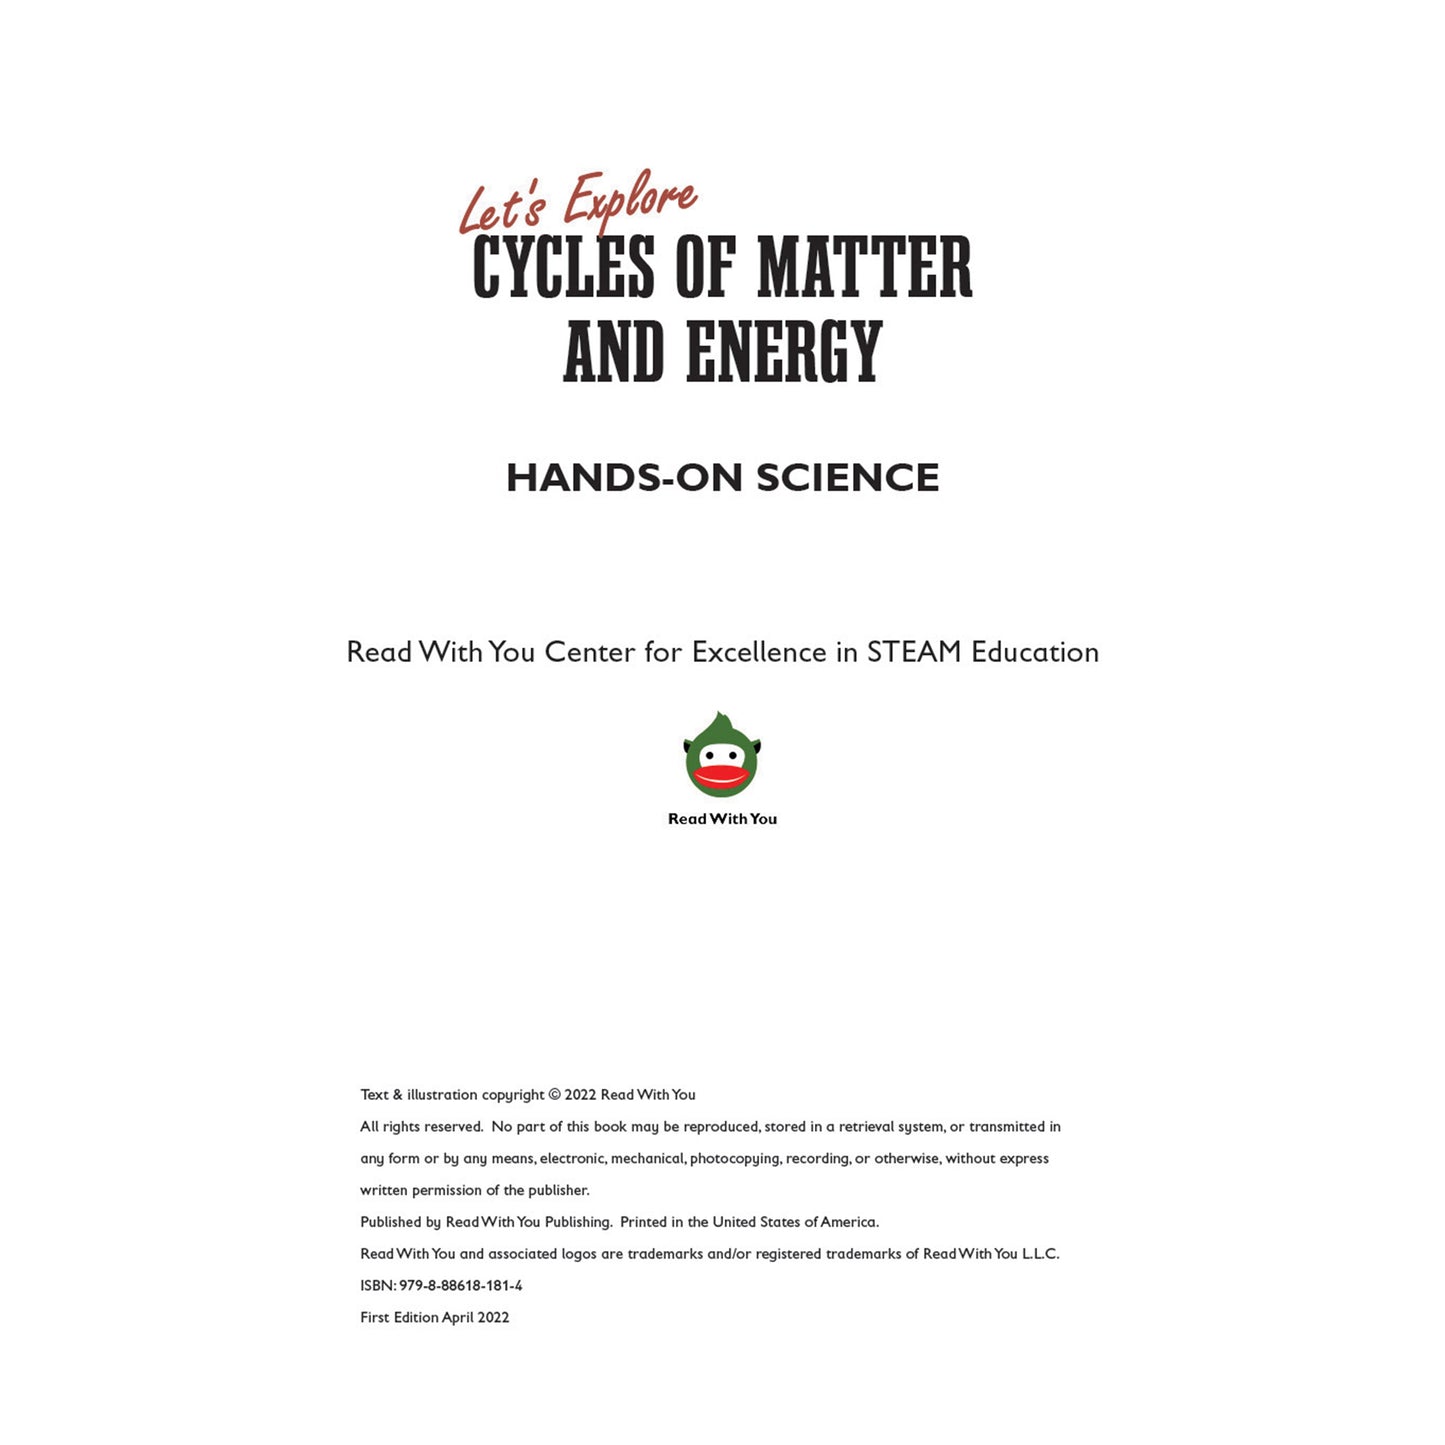 Let's Explore Cycles of Matter and Energy